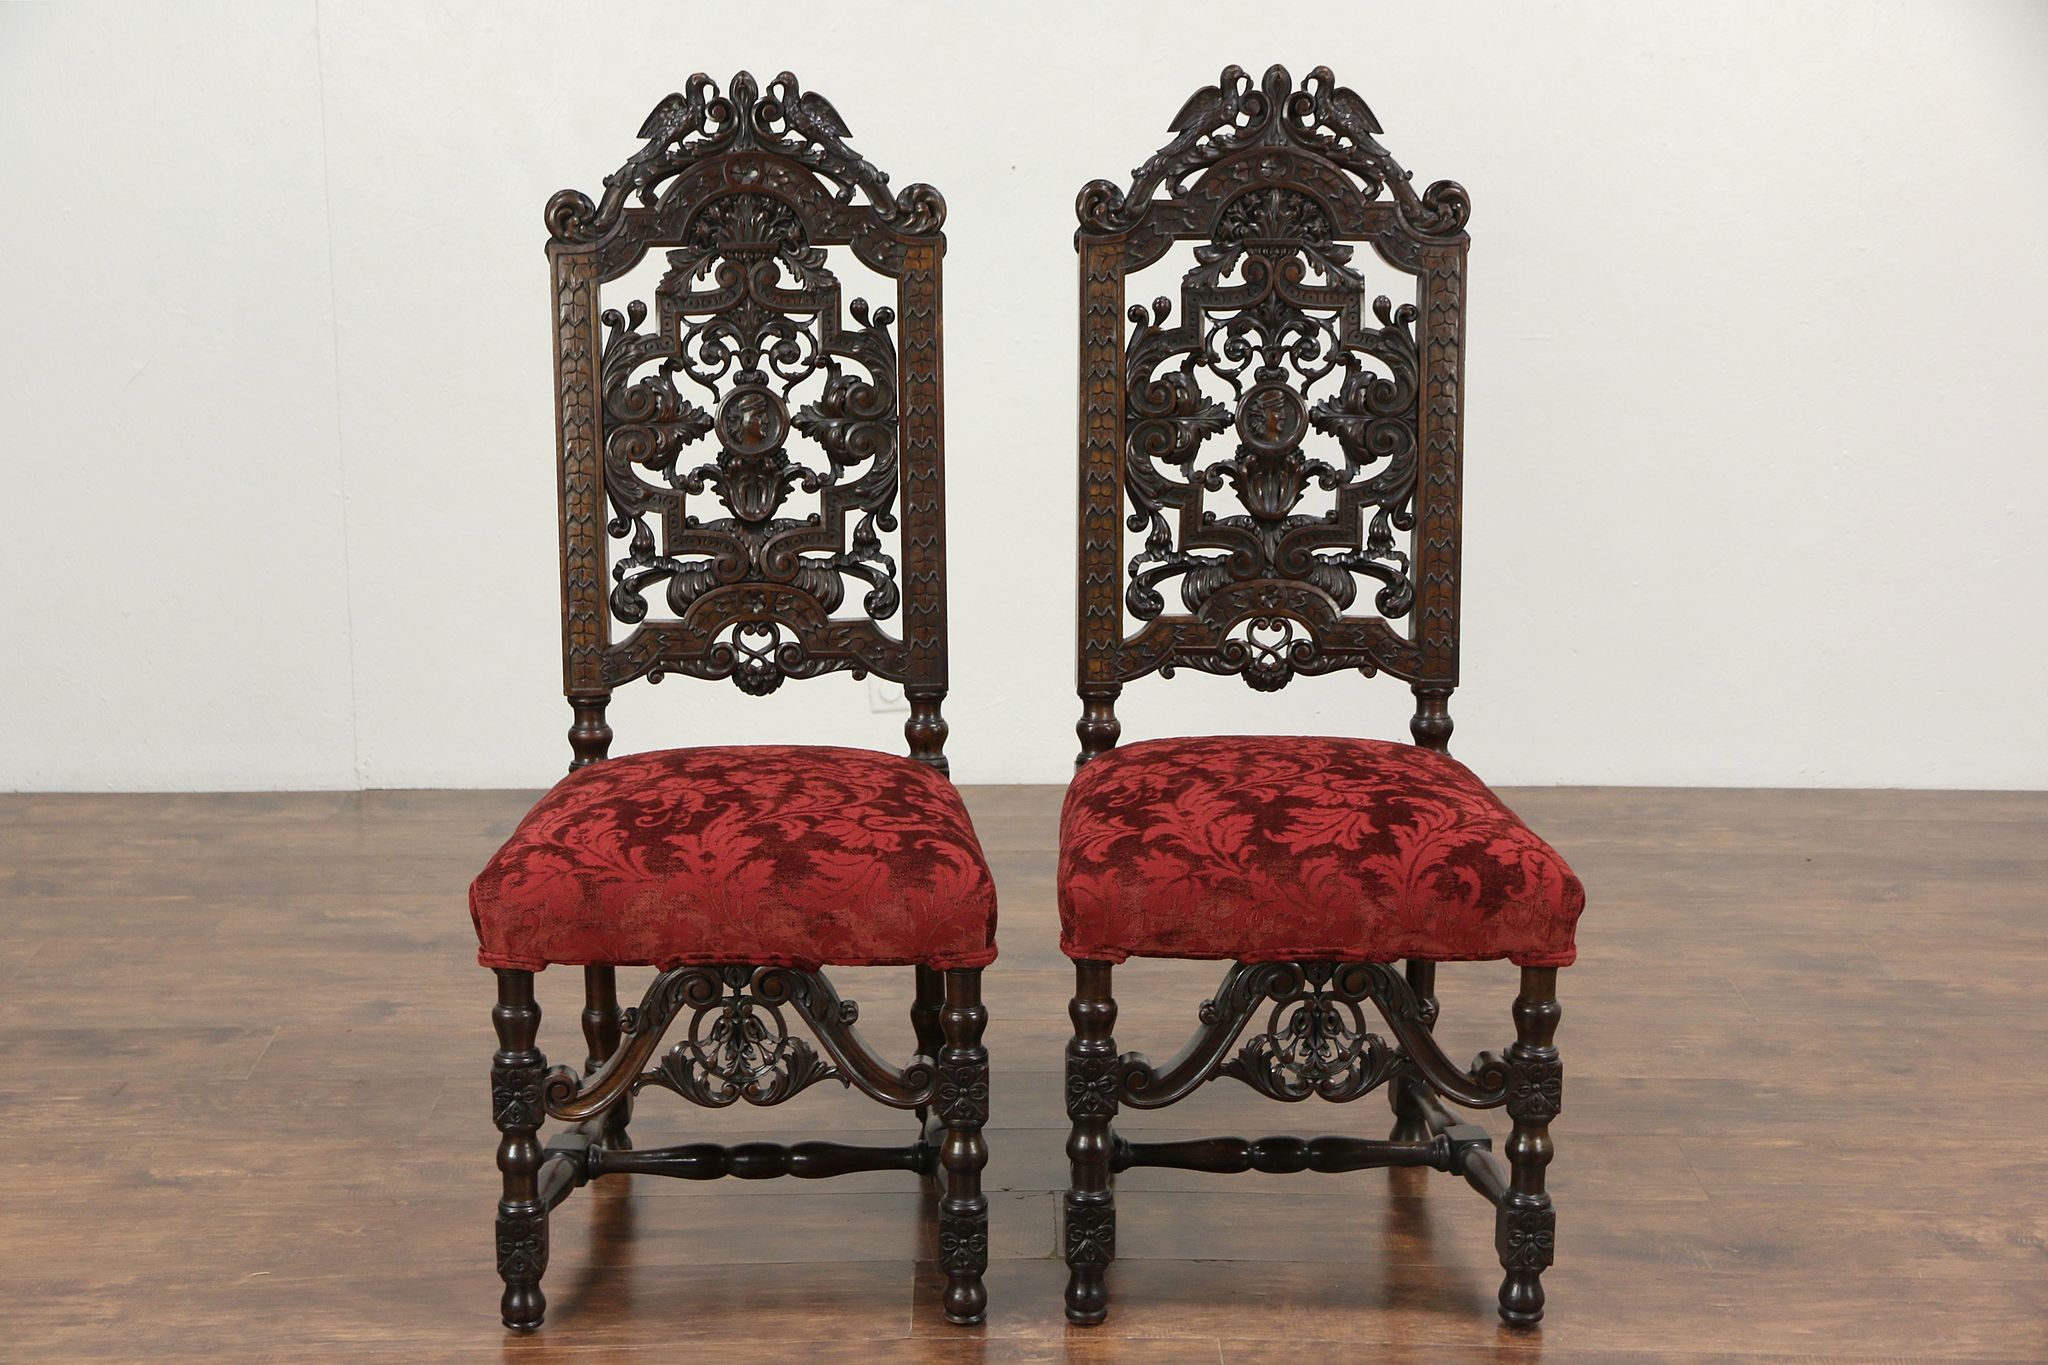 Sold Pair Of Italian Renaissance Antique 1890 Chairs Carved